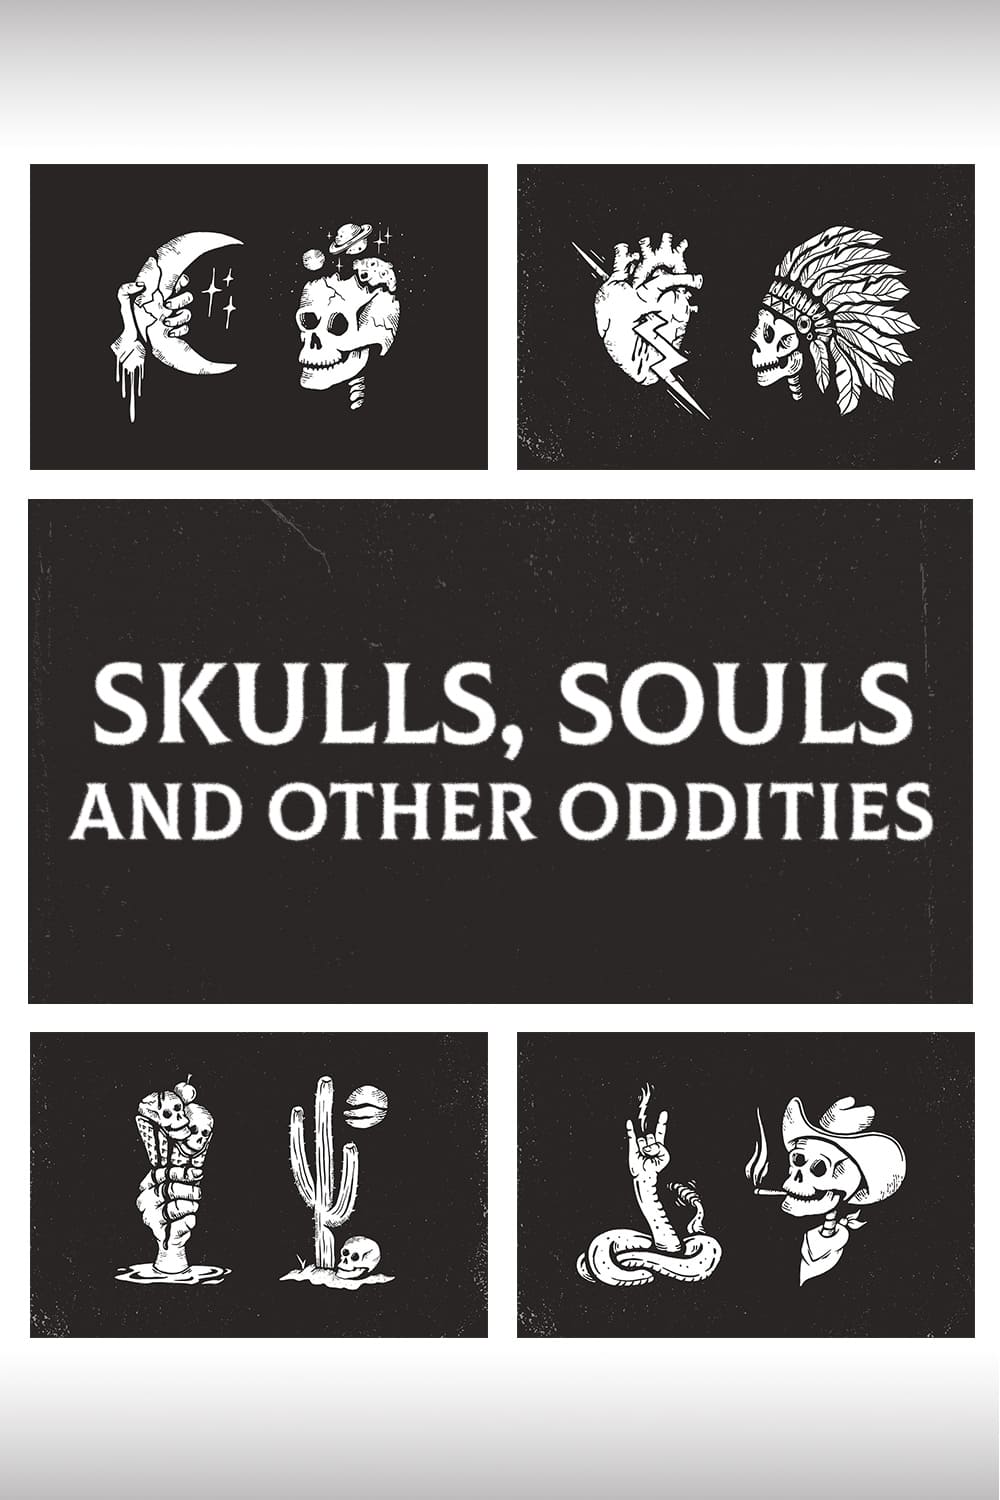 Skulls, Souls And Other Oddities pinterest image.